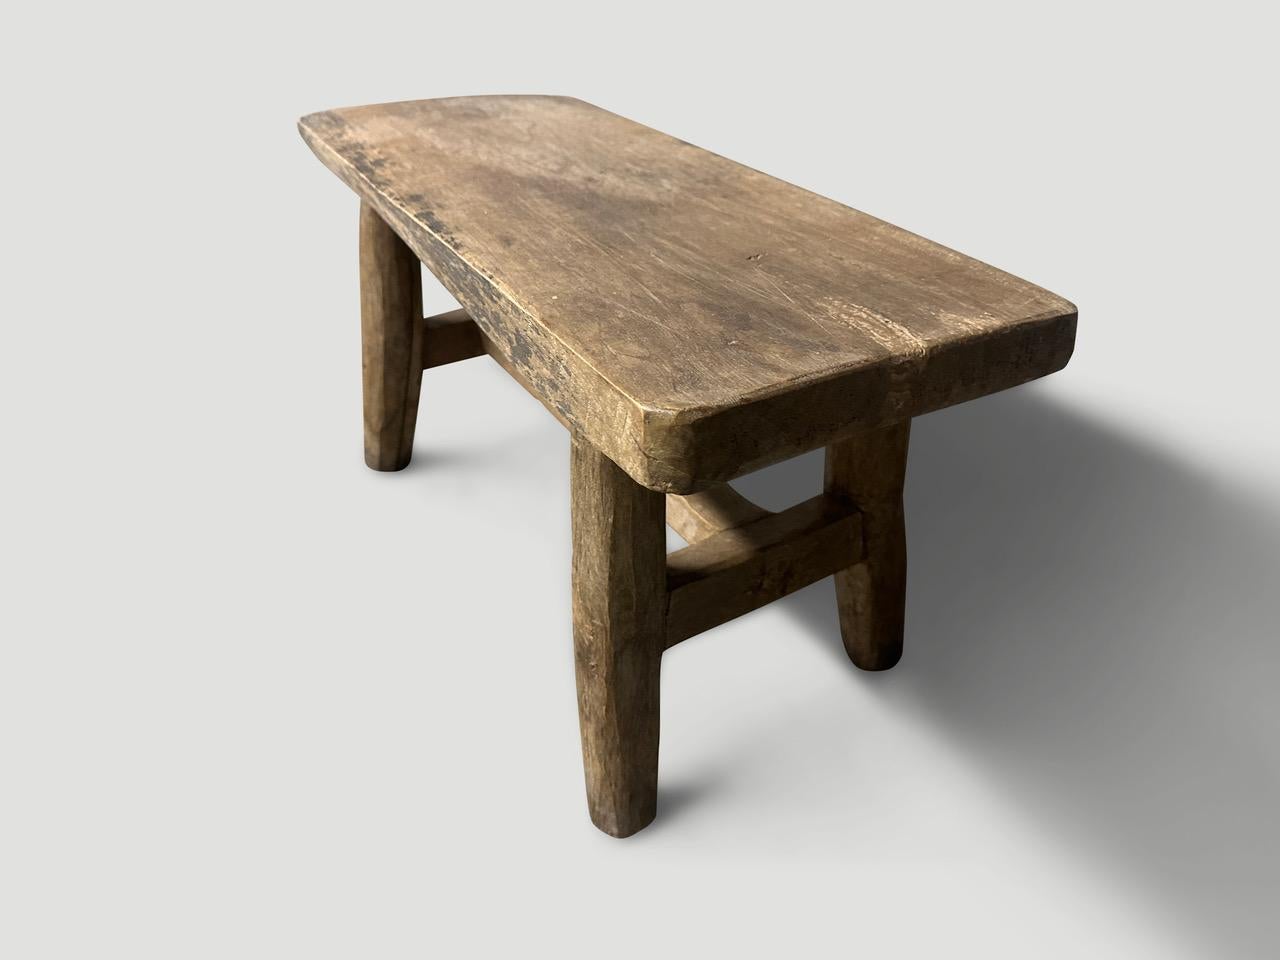 Antique hand made side table or small bench with a 1.5” thick top. Lovely patina and character on this beautiful piece. Circa 1950

This side table or small bench was hand made in the spirit of Wabi-Sabi, a Japanese philosophy that beauty can be